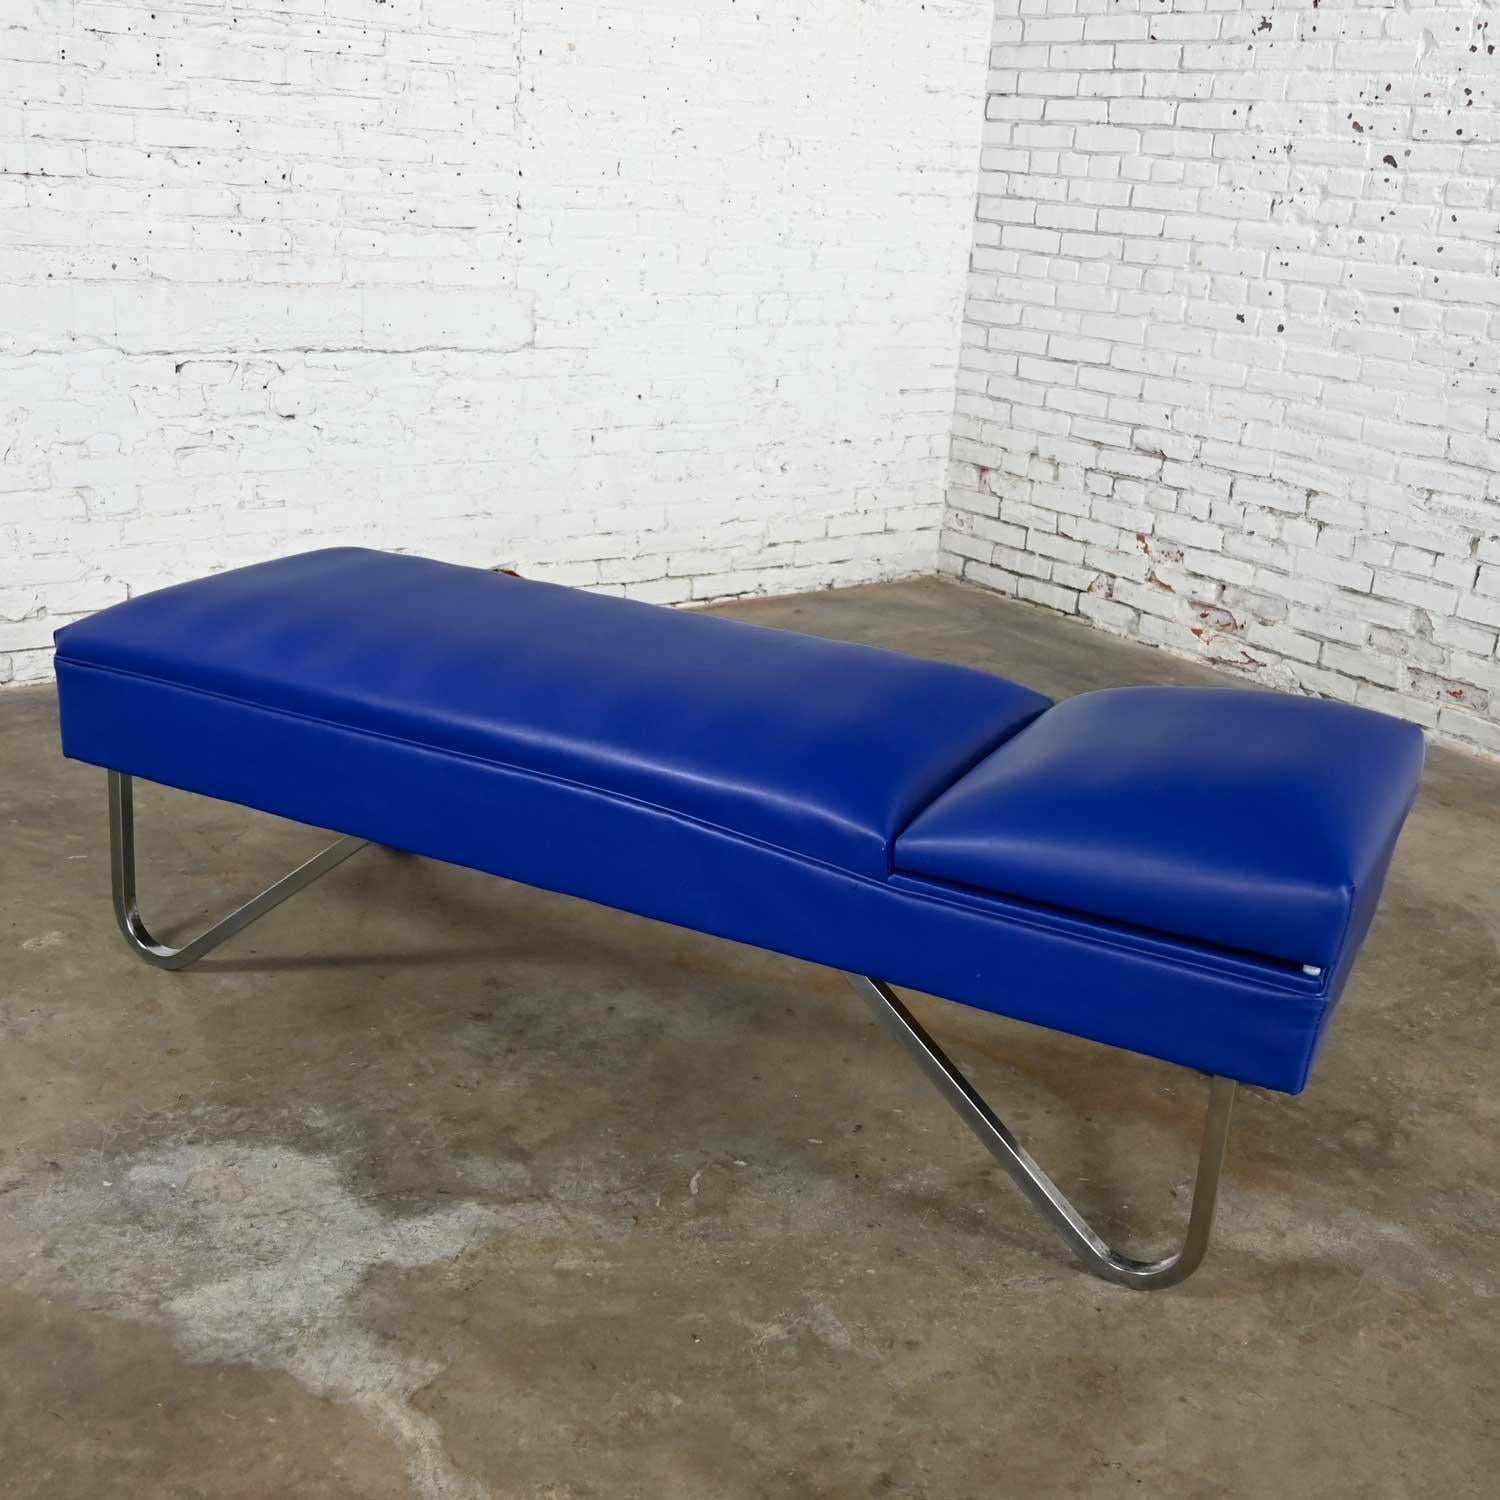 Handsome streamline modern, Mid-Century Modern, or Industrial style royal blue & vinyl or faux leather and chrome chaise or daybed with adjustable head or back rest. Wonderful condition keeping in mind that this is vintage & not new so there will be